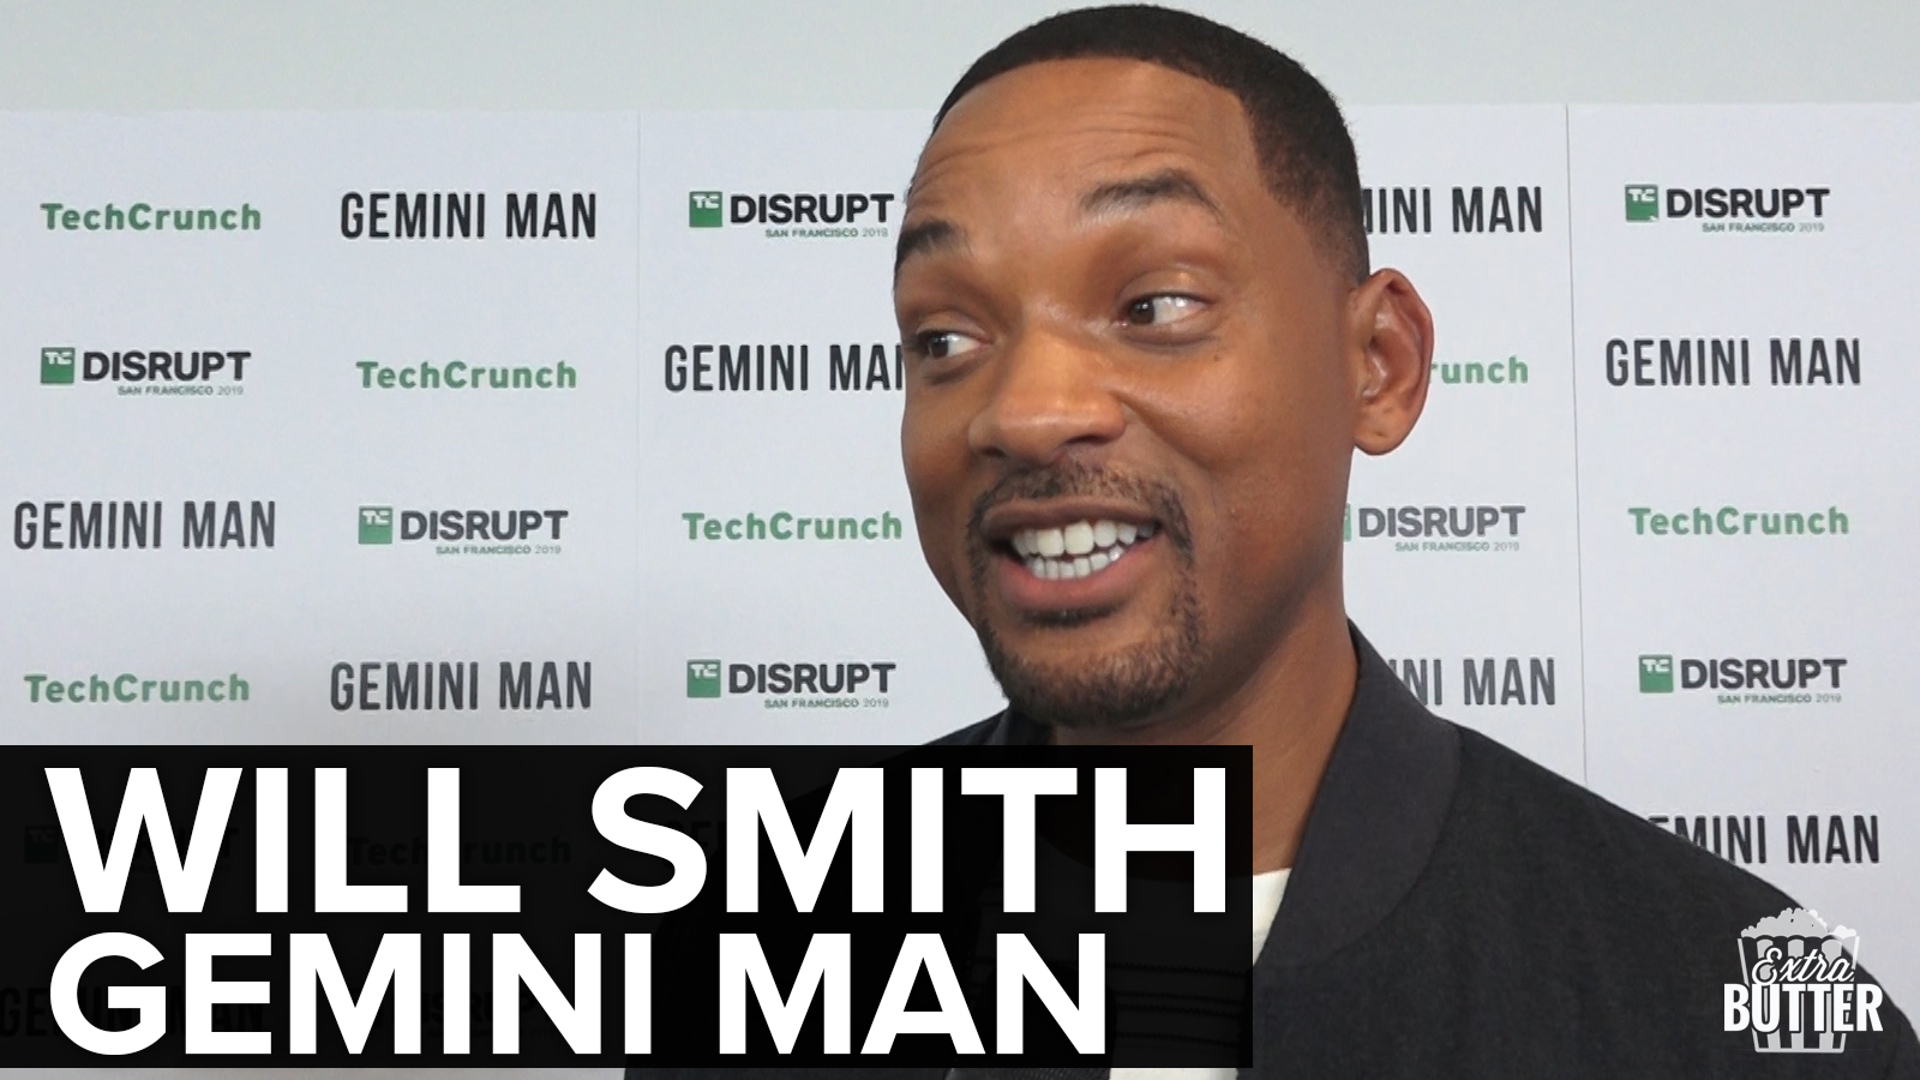 Will Smith talks about his movie 'Gemini Man' and the technology that makes the film unique. Will also gives Kelly Savanna Deaton some marriage advice.